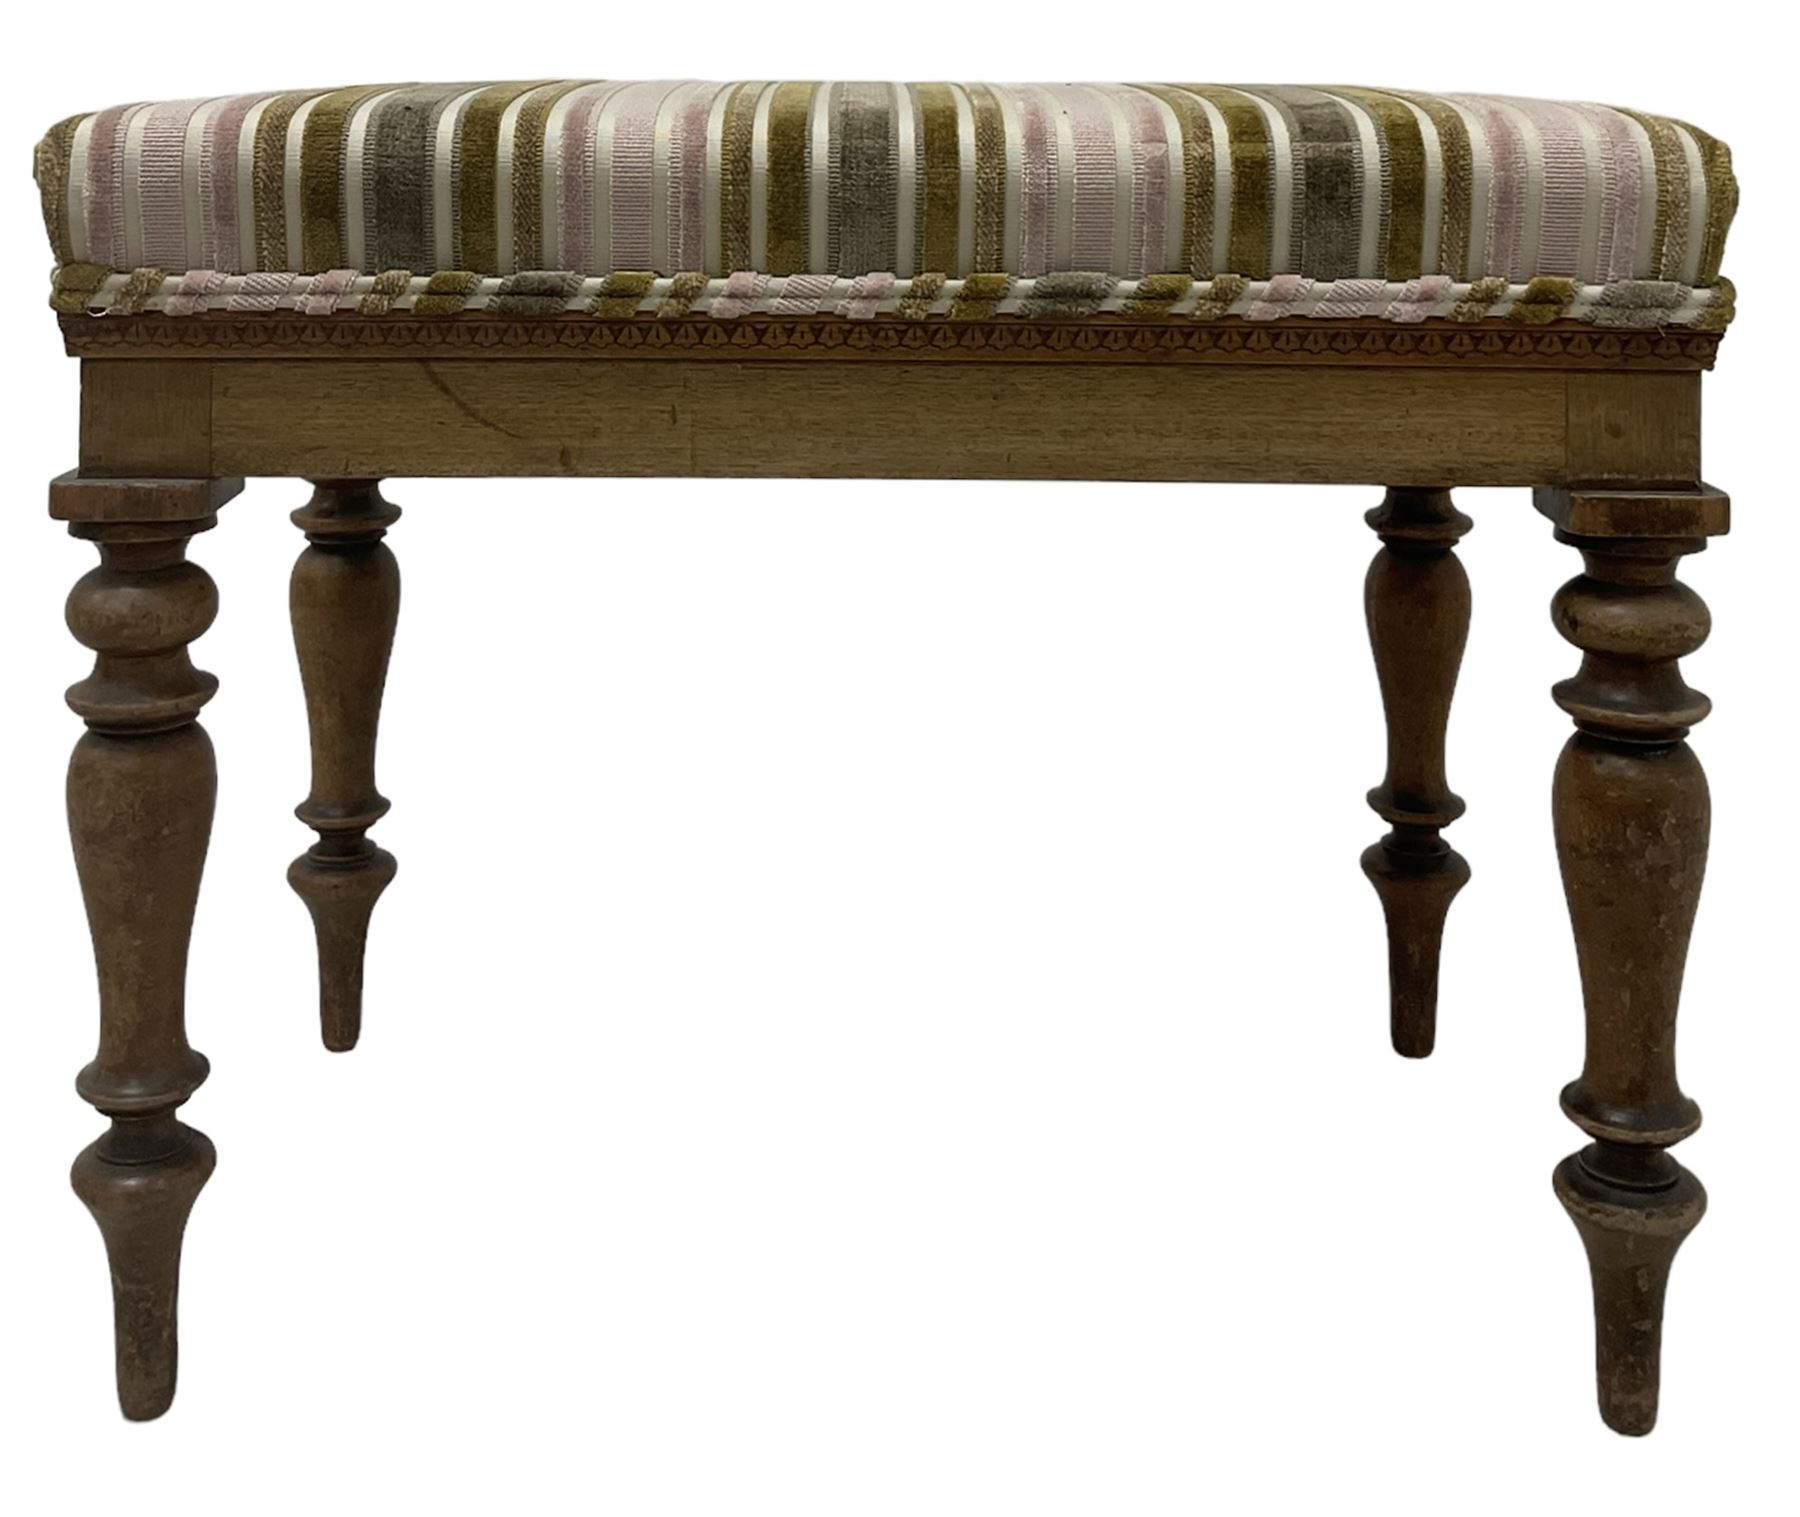 Victorian stool upholstered in striped fabric - Image 2 of 3